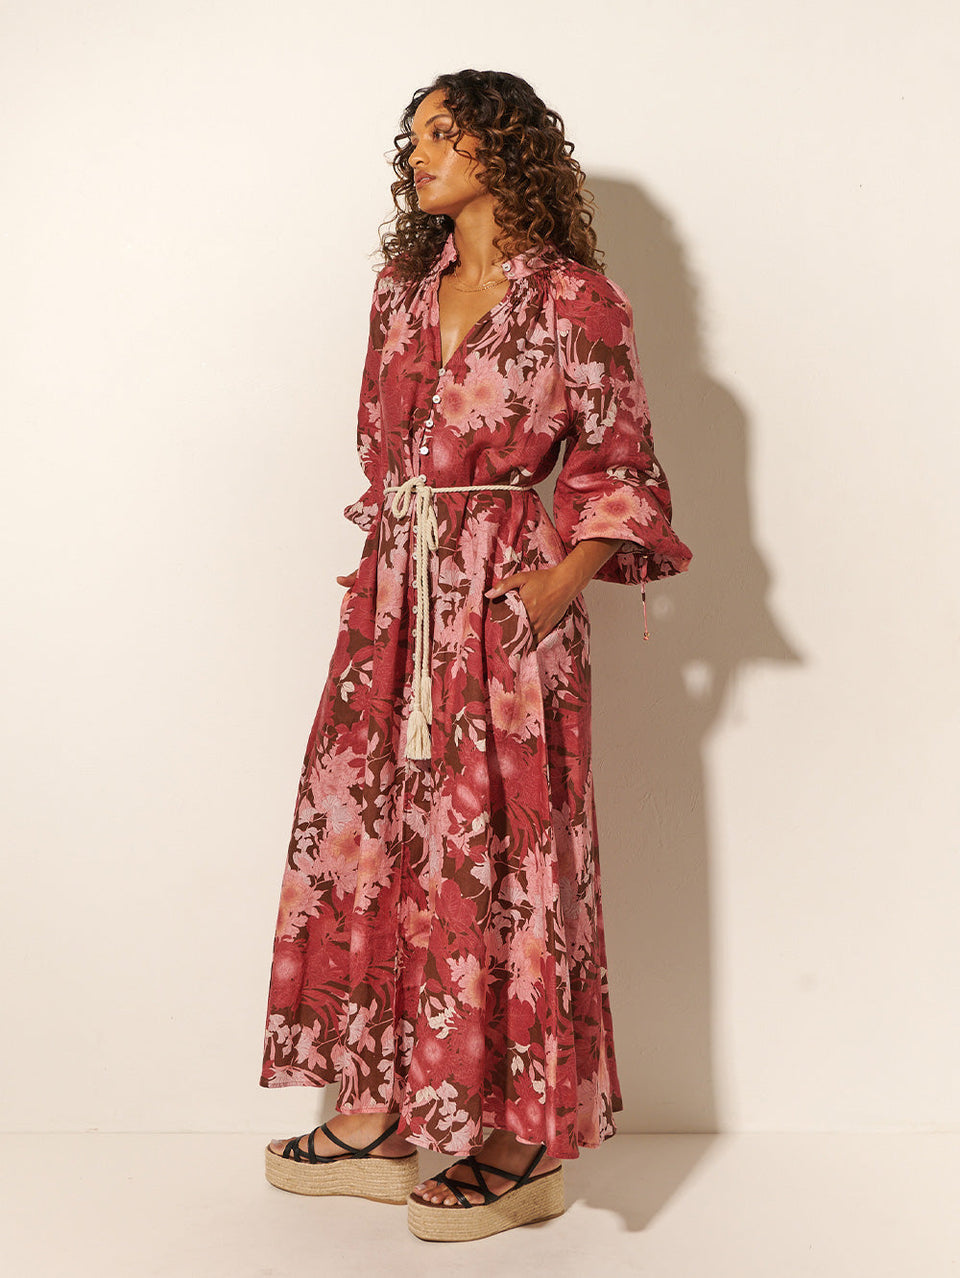 Studio model wears KIVARI Hacienda Maxi Dress: A red, pink and brown floral dress with a shirred collar, button-through front, waist ties and full-length sleeves, crafted from sustainable LENZING Viscose Crepe.